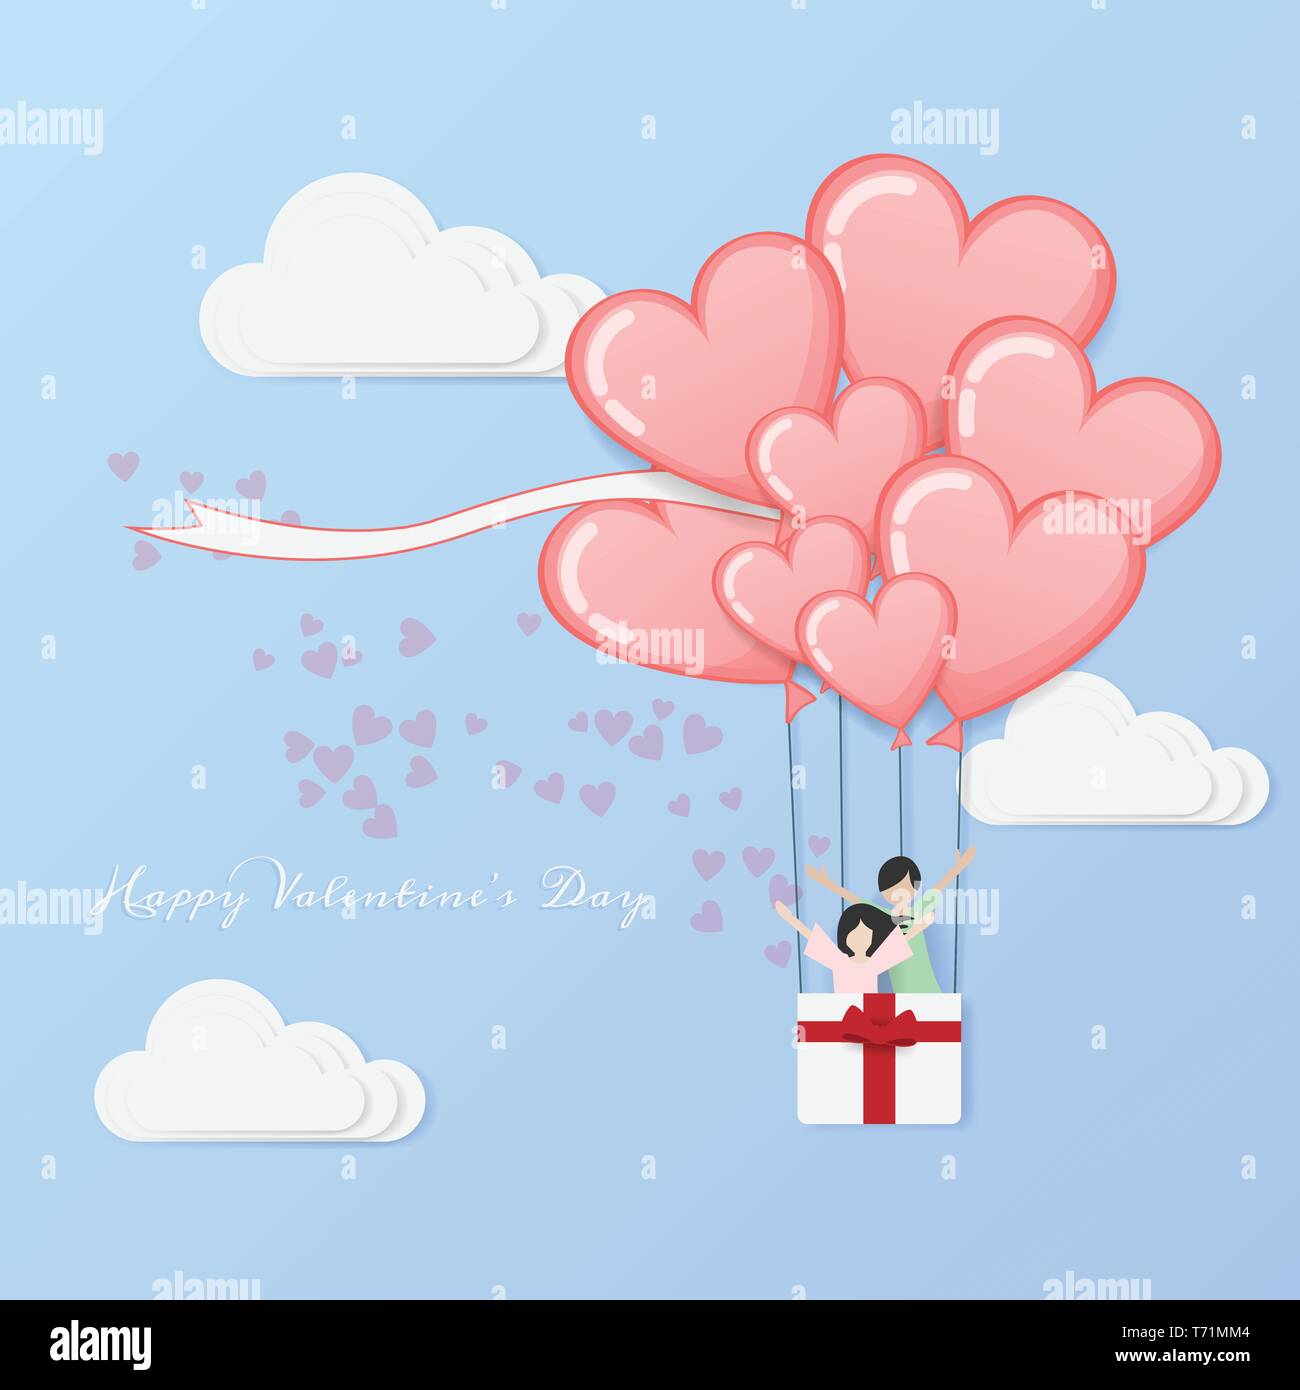 10x8ft Valentines Backdrop Cartoon Hearts Hot Air Balloon Cloud Pink Pastel Photography Backgroud Love Theme Romantic Wedding Anniversary Lover Party Couple Dating Photo Props 